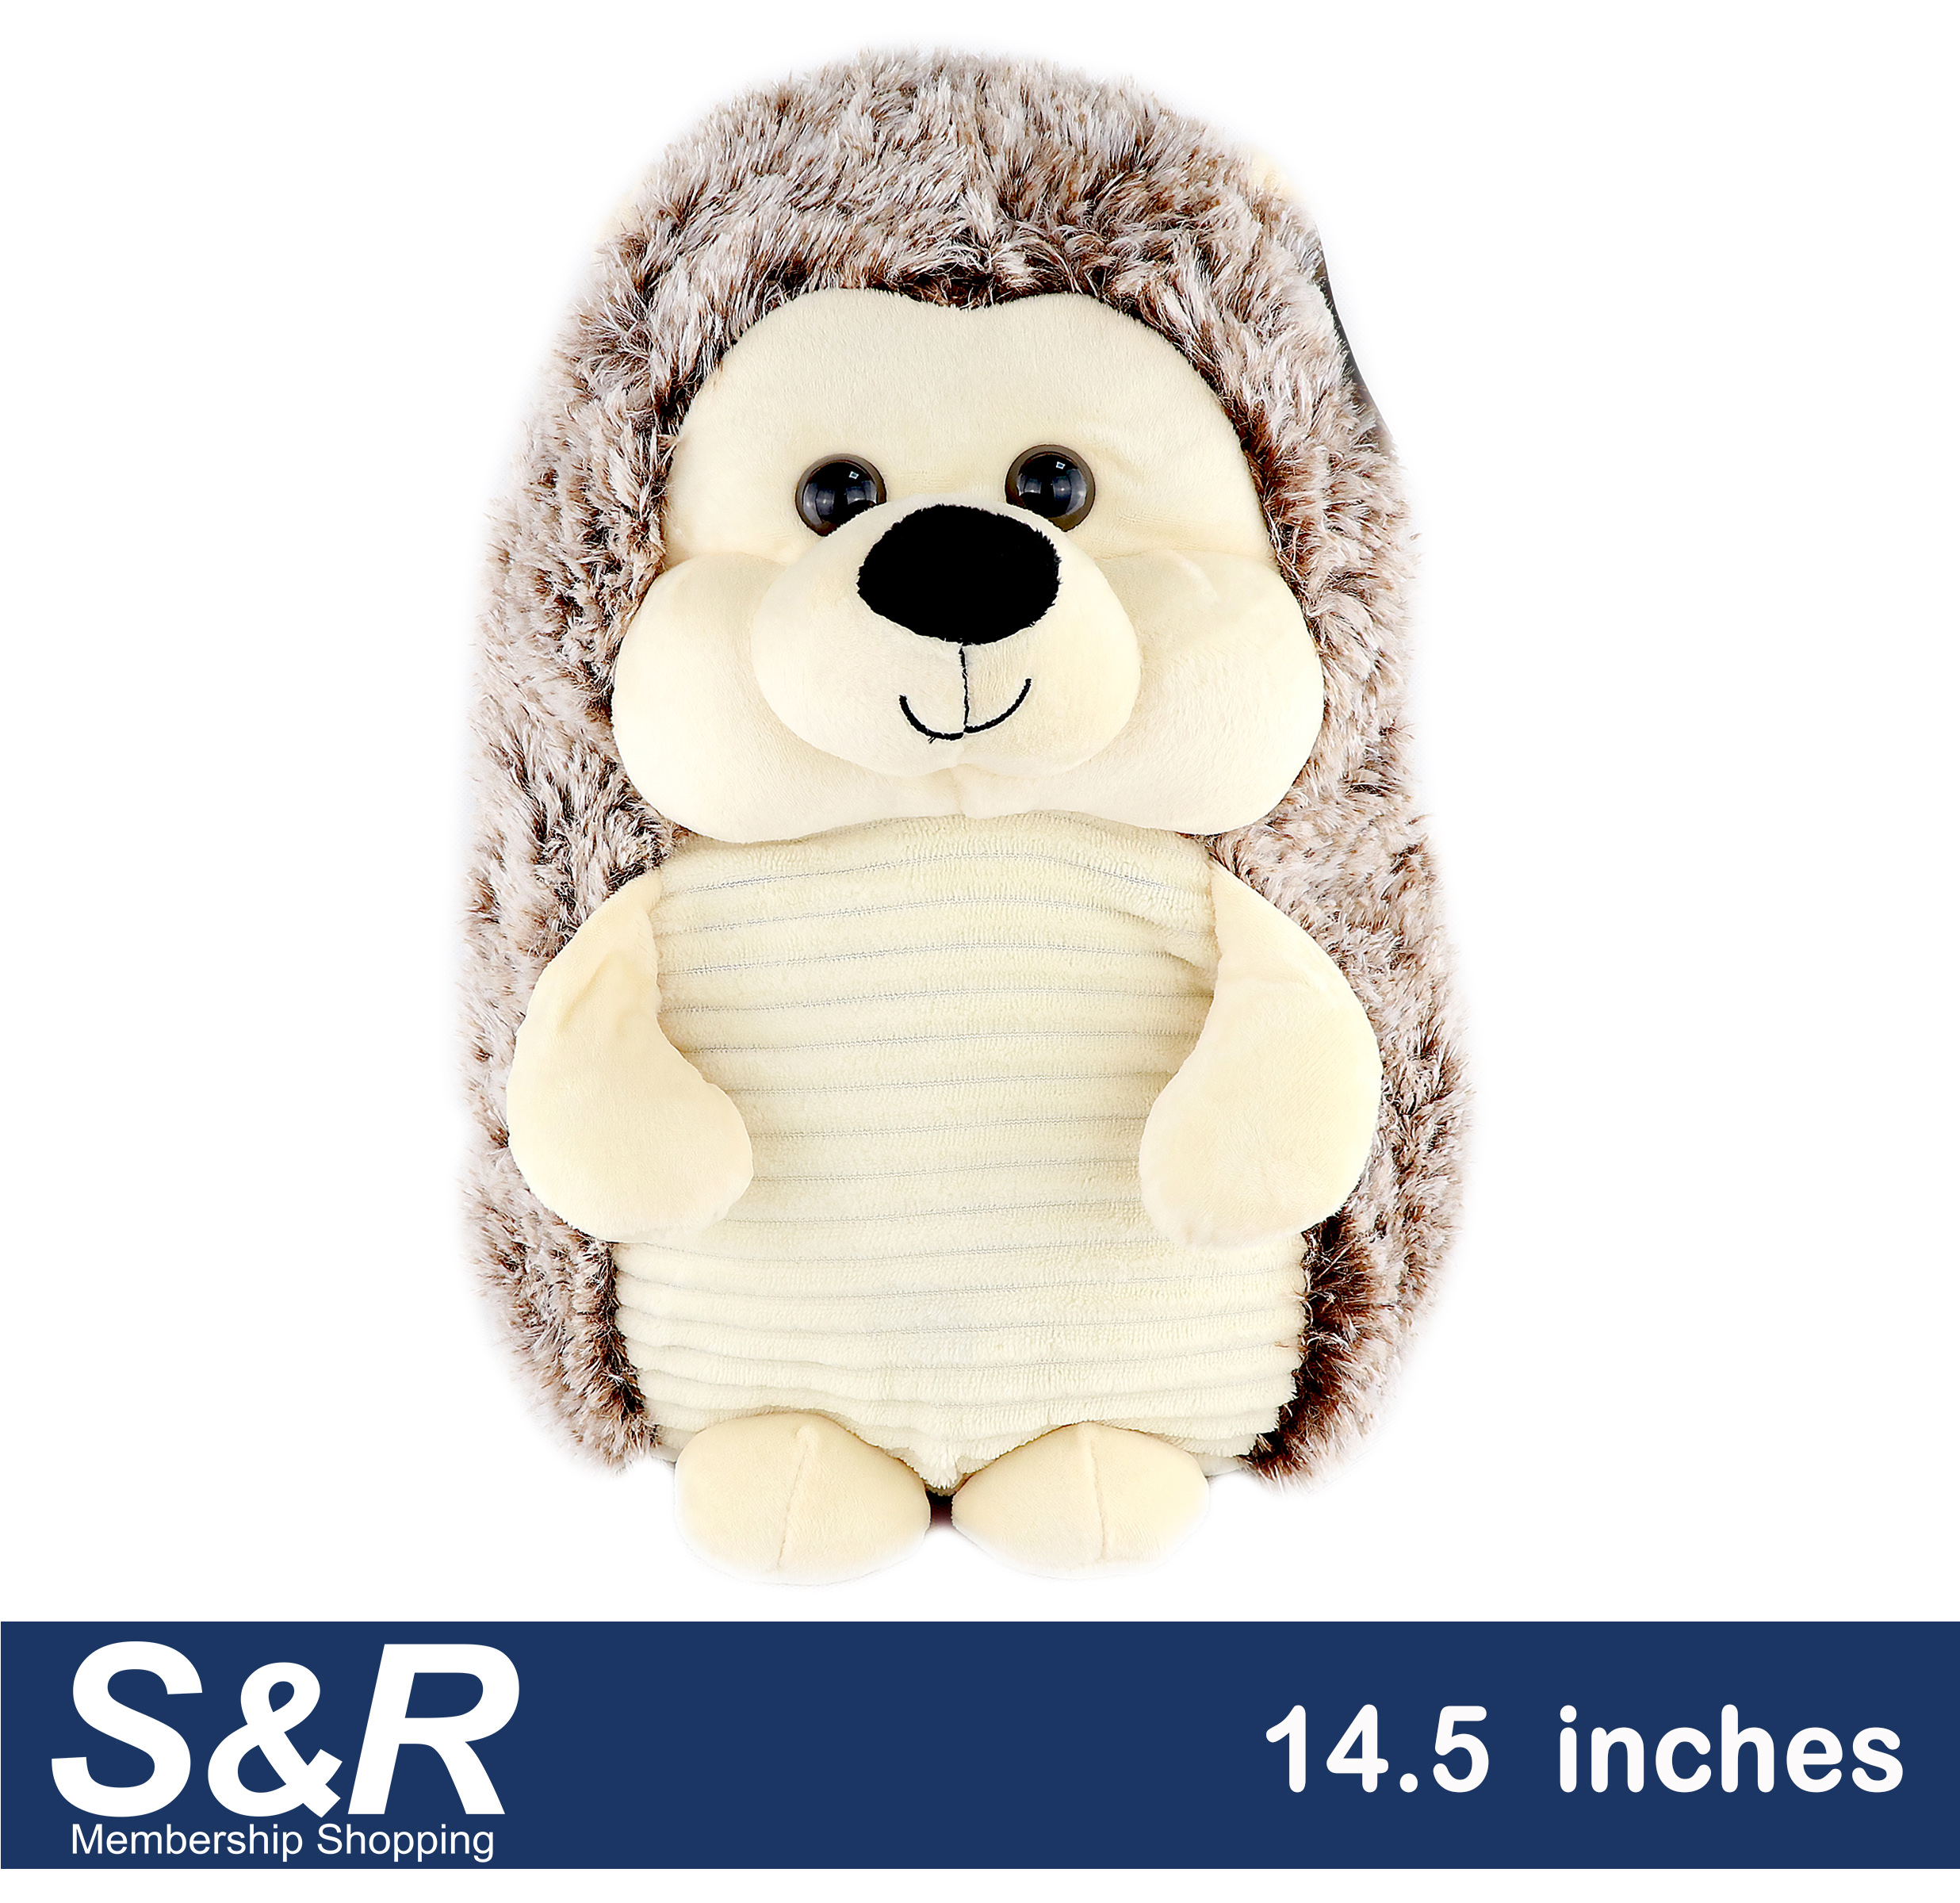 Sloth Assorted Plush Toys 14.5 inches 